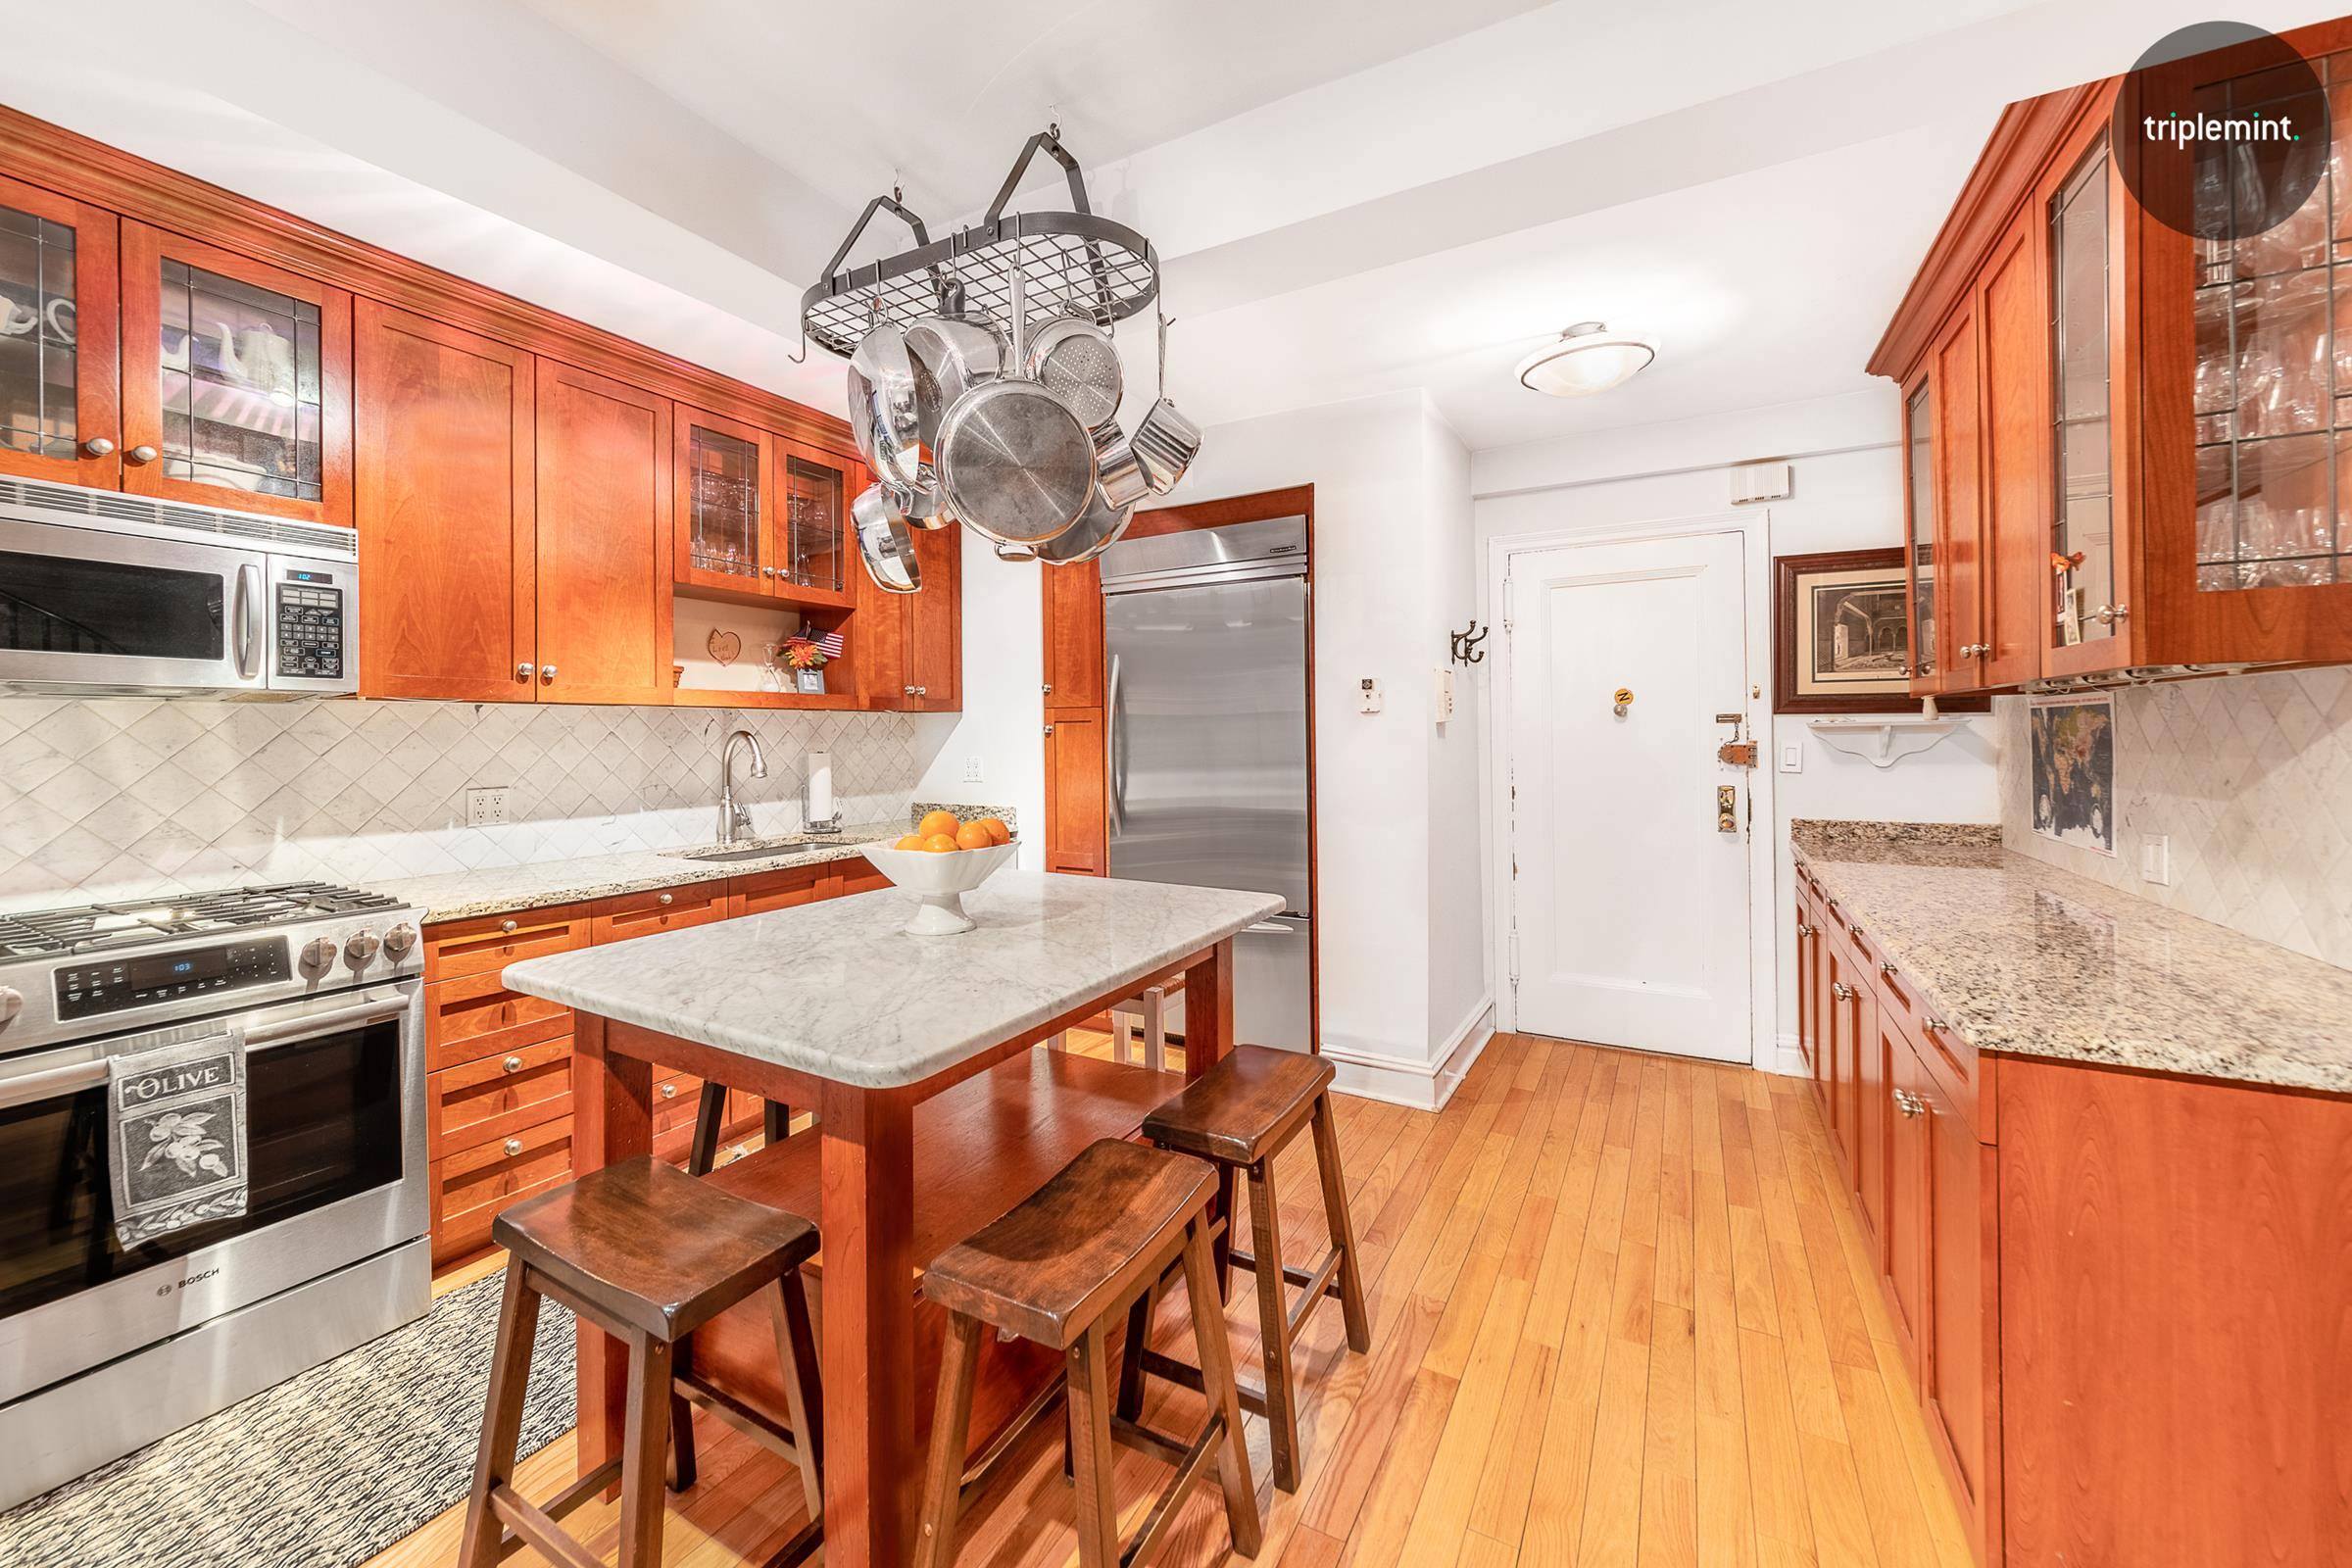 If value, space, and incredible use of every inch of the home are important in your search for a home, this apartment is the one you've been waiting for.